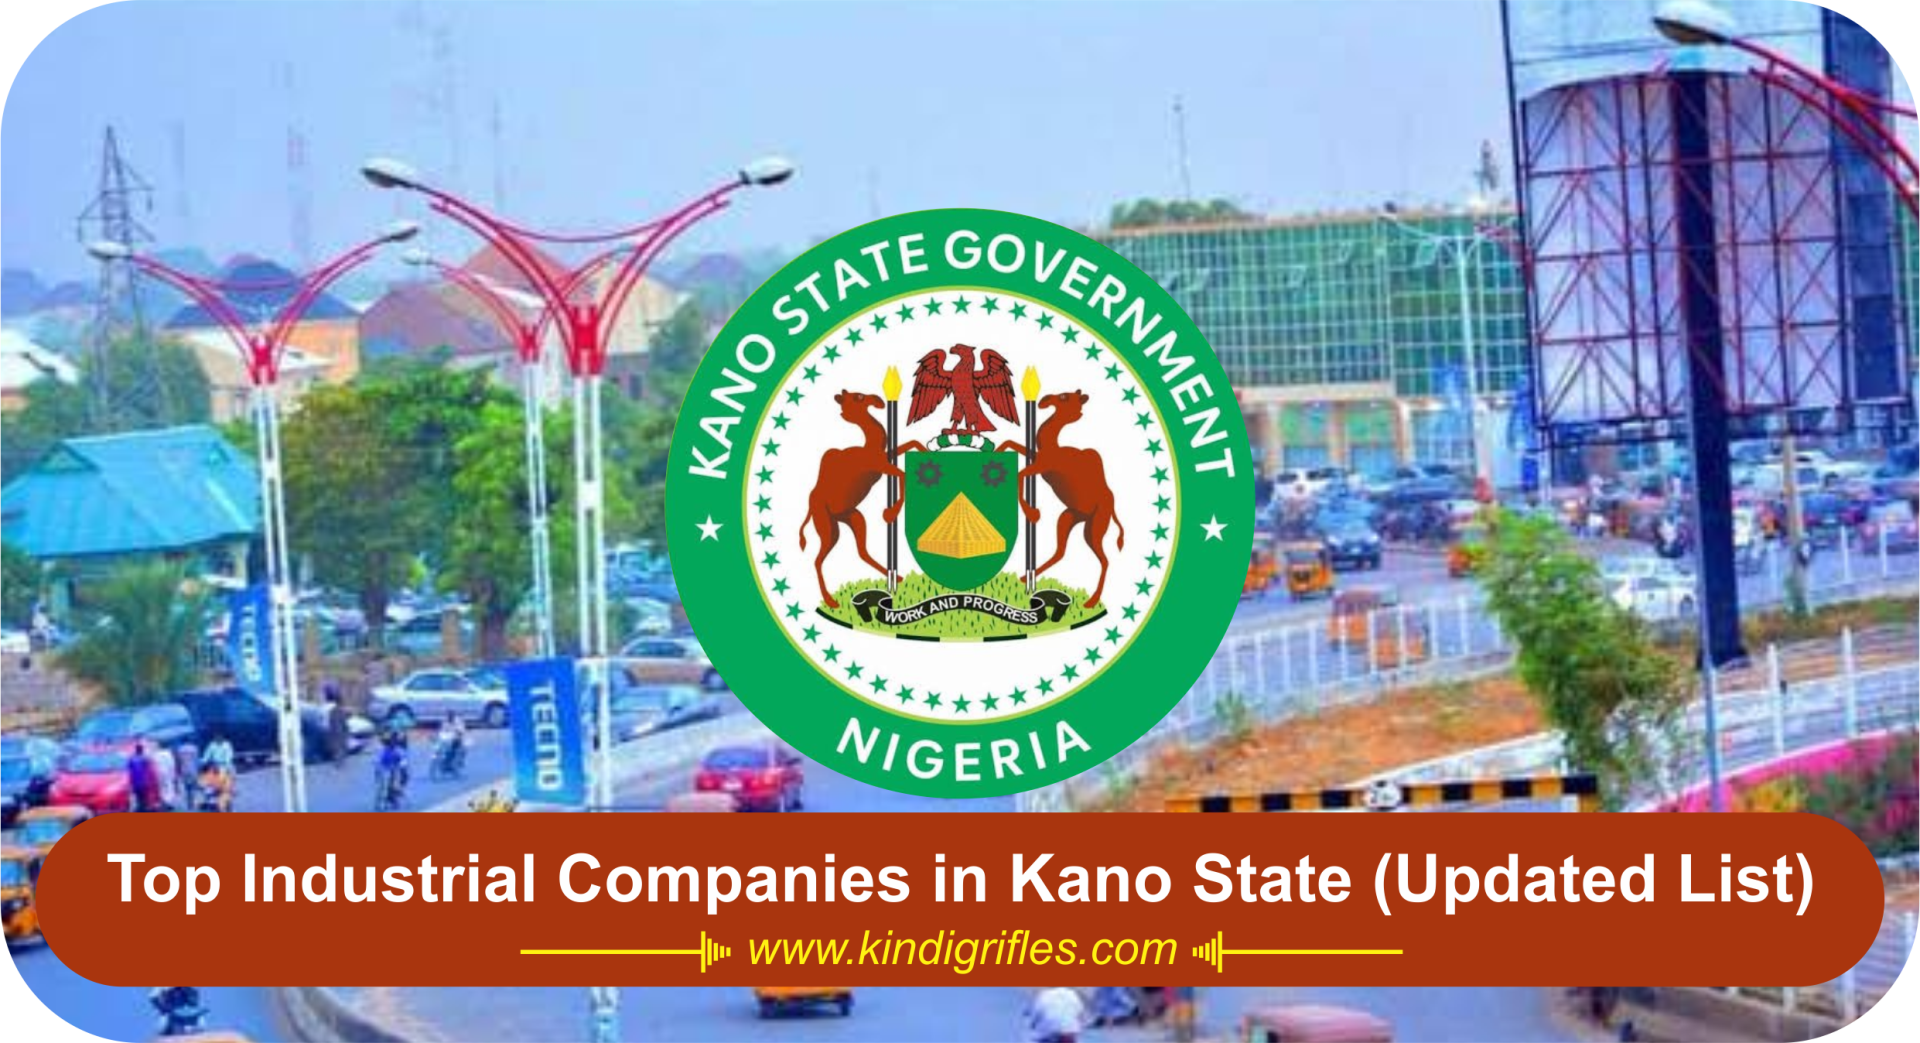 Top Industrial Companies in Kano State (Updated List)